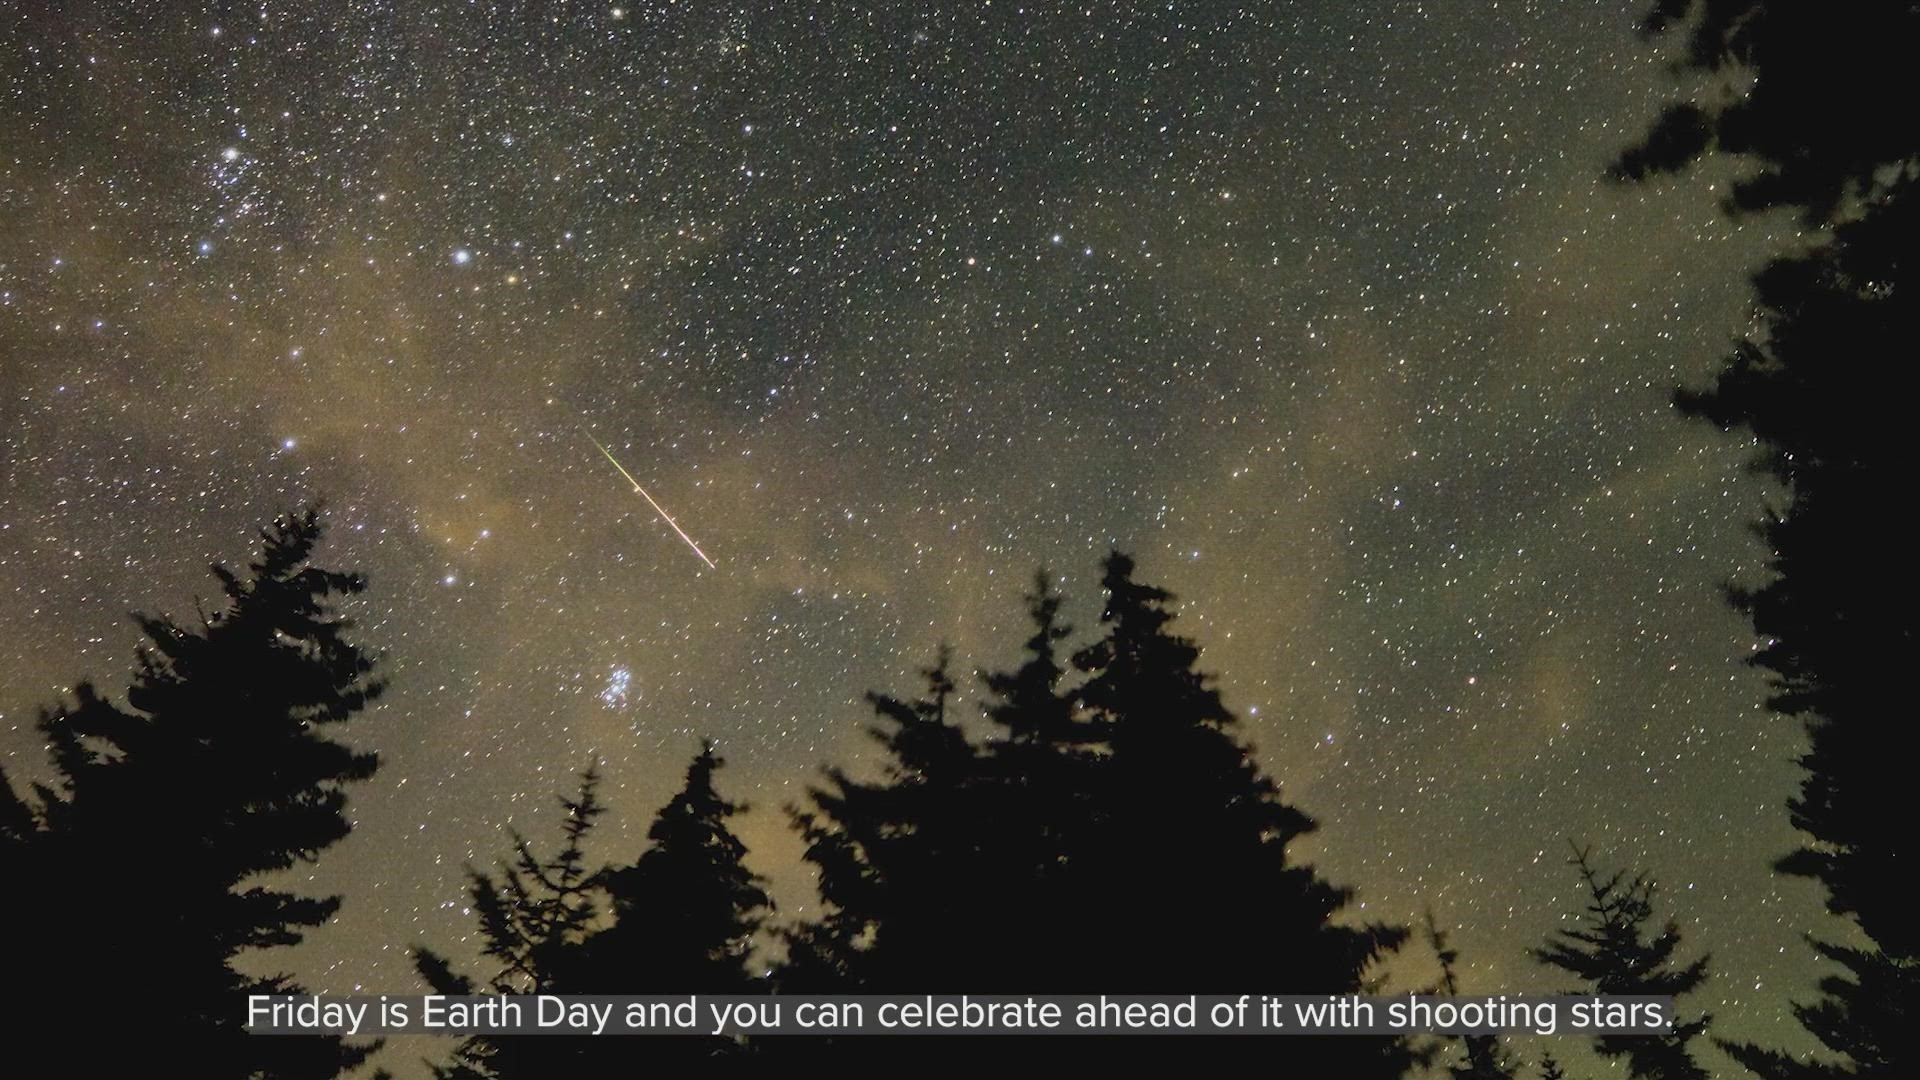 This ancient meteor shower peaks every year around Earth Day.